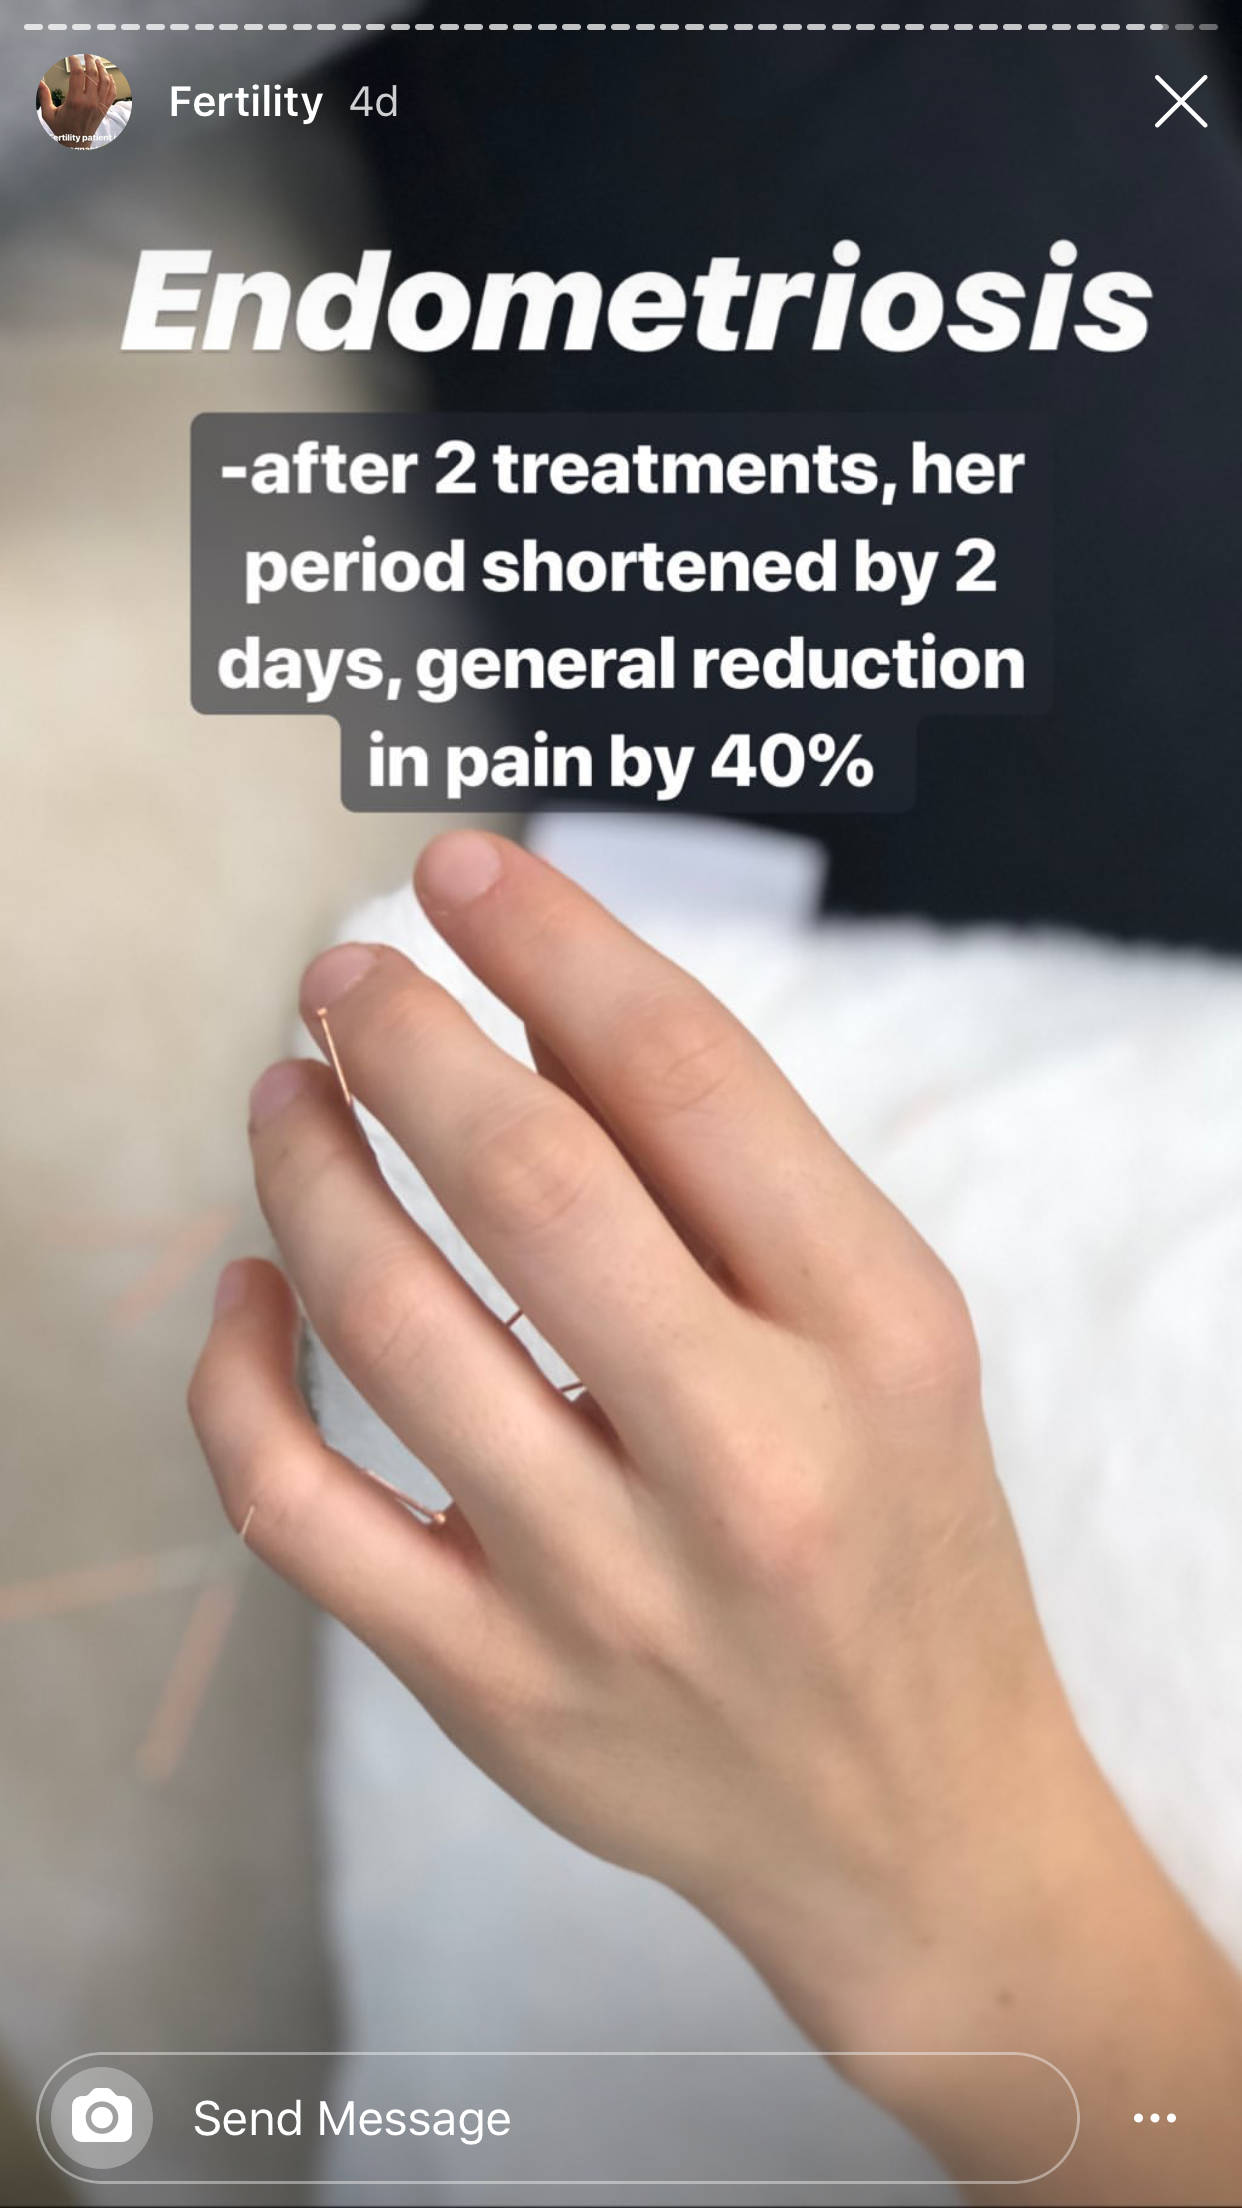  SuJok acupuncture in Vancouver used for treating reproductive system conditions. Patient receives treatment for endometriosis. treatments result in reduction of pain by 40% and a shorter period.  